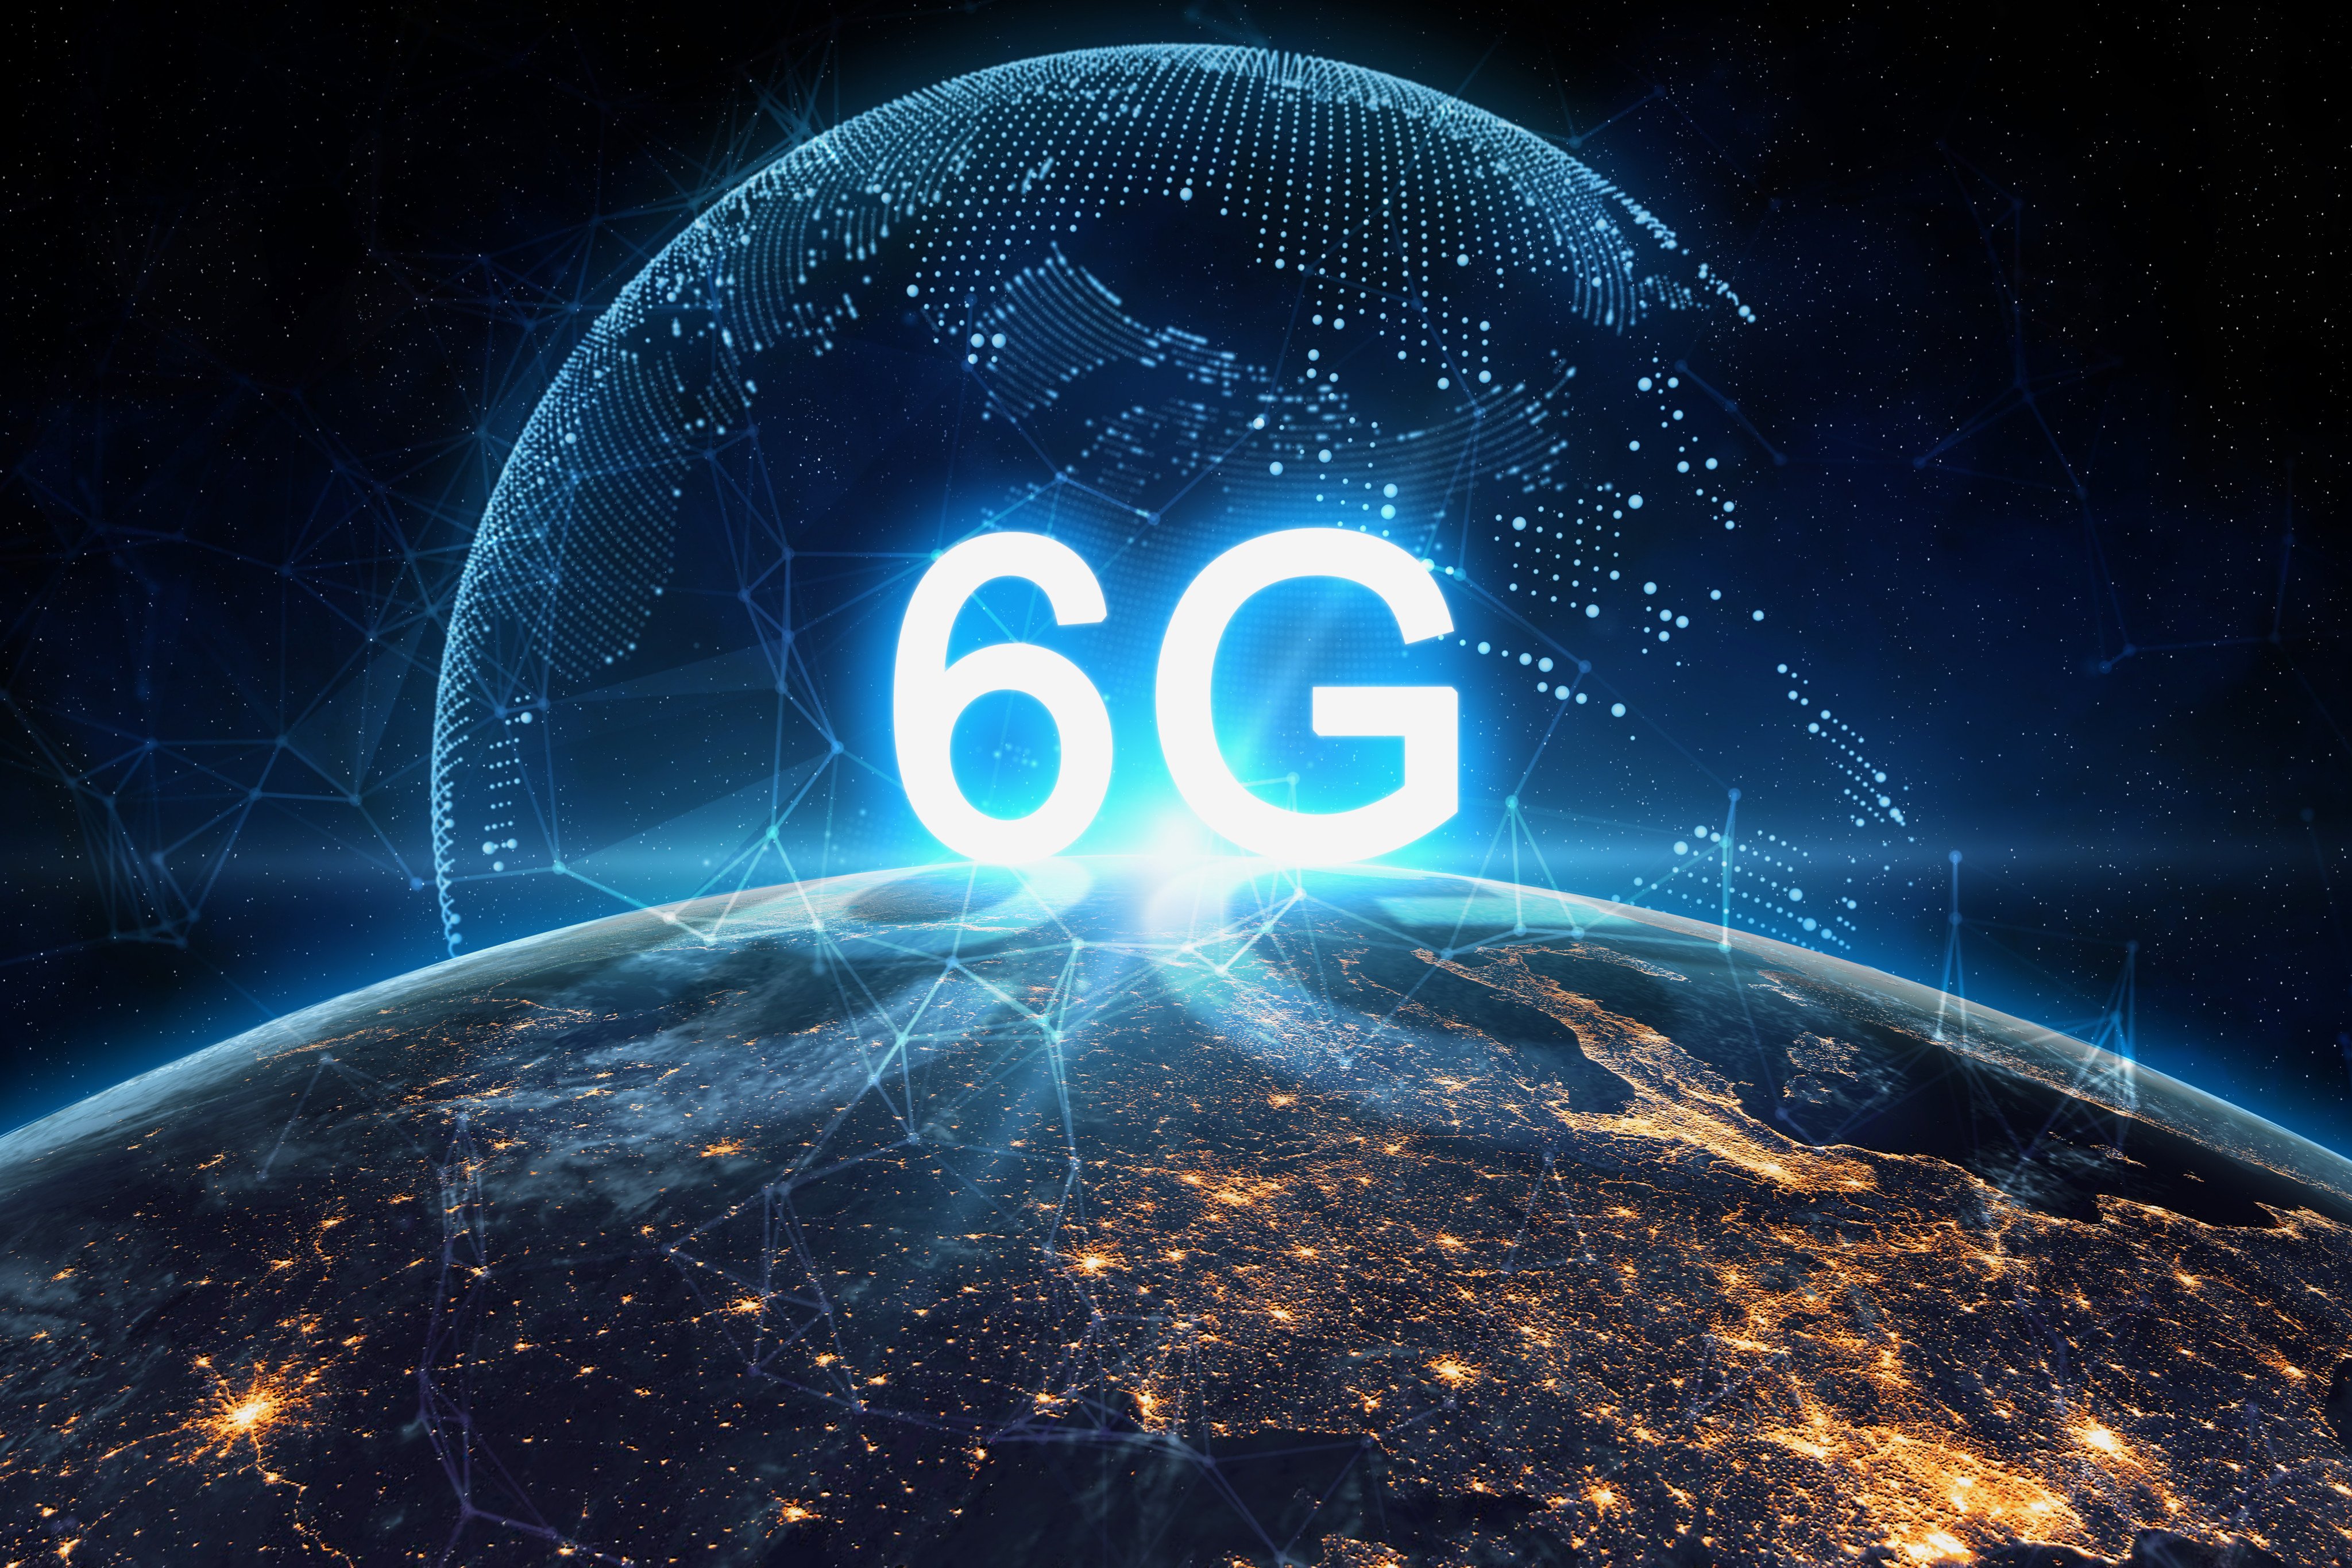 Sixth-generation wireless technology promises to revolutionise communication with data transmission speeds up to 50 times faster than 5G. Photo: Shutterstock Images